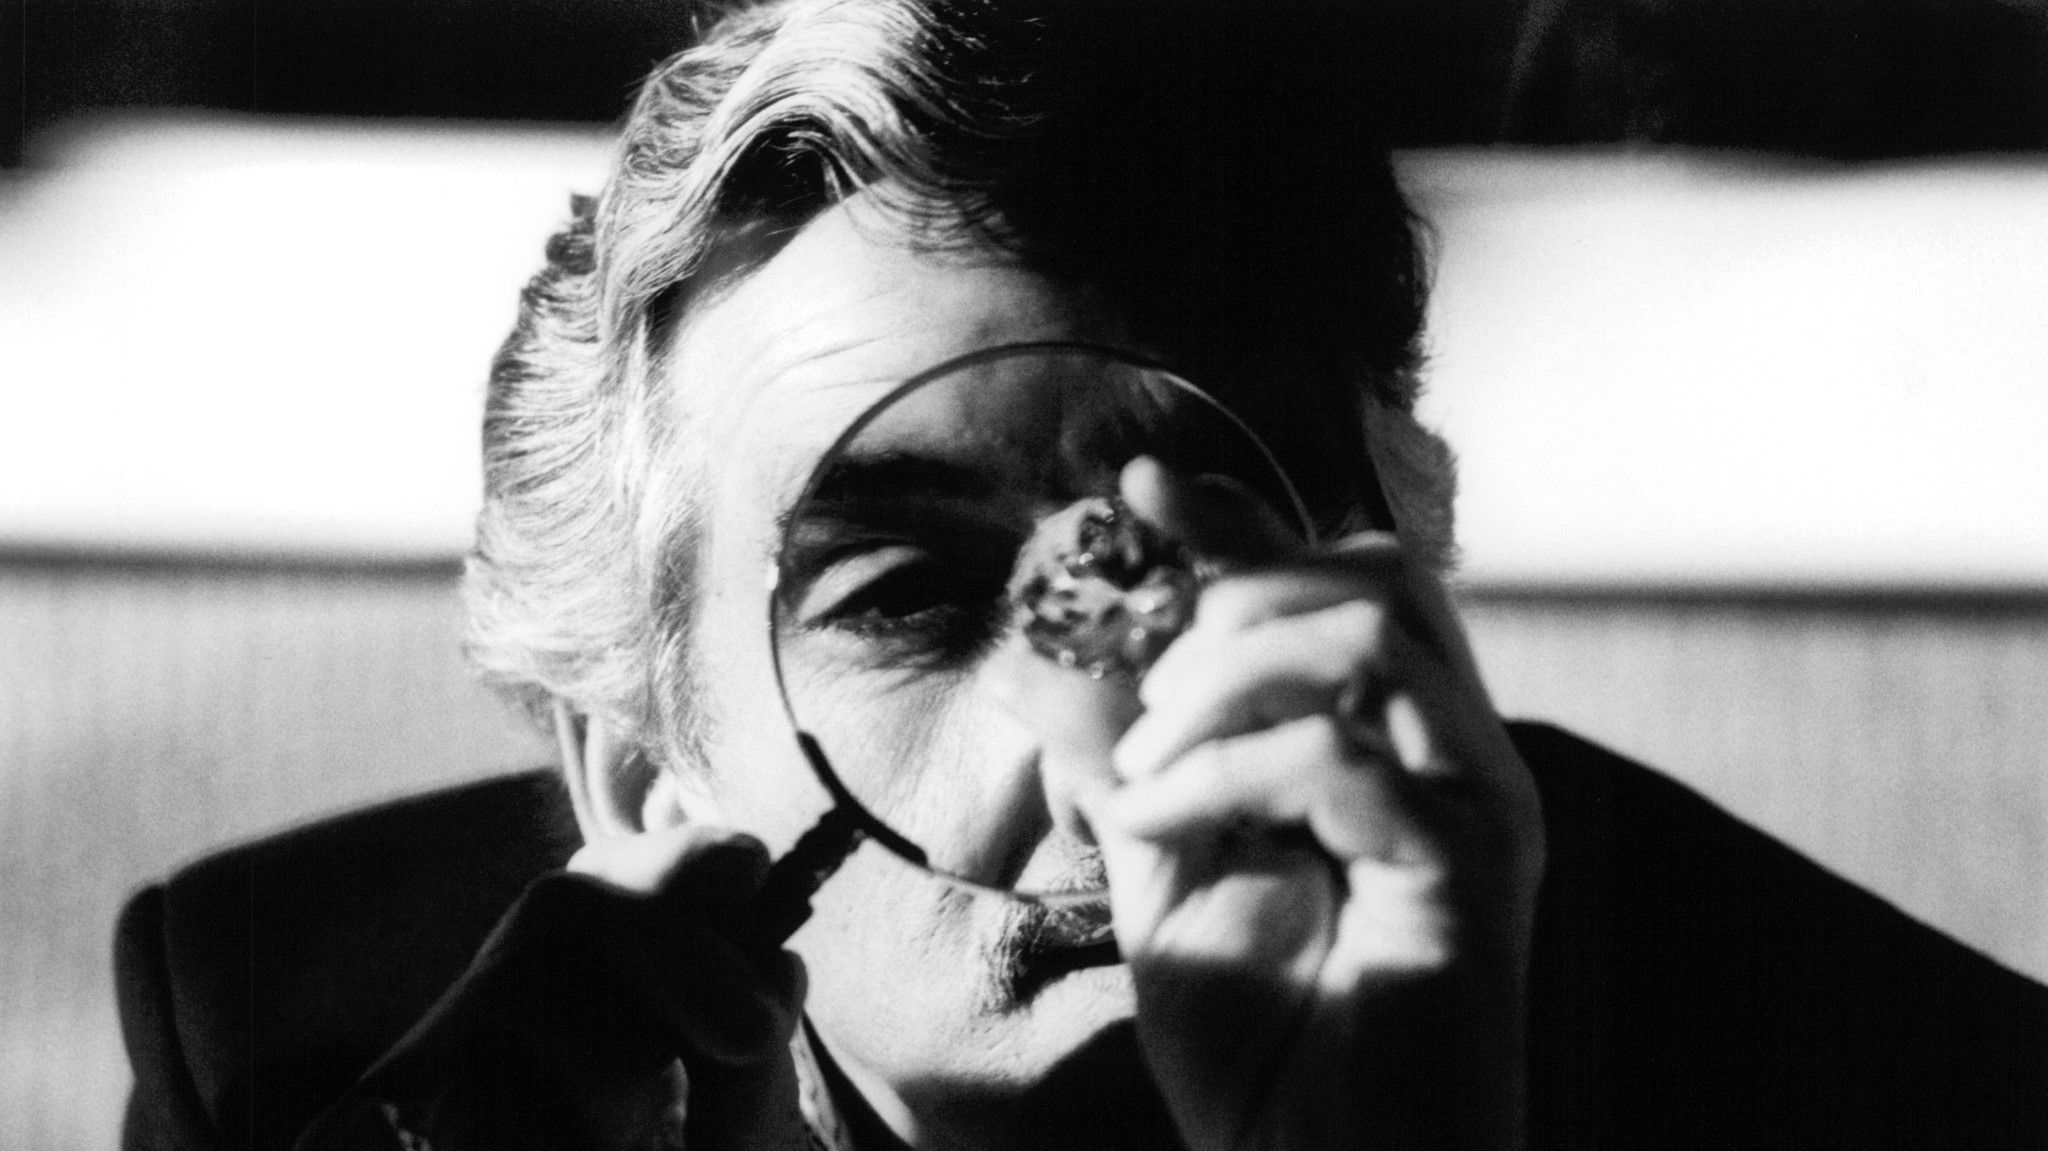 Dennis Farina looking at a diamond with a magnifying glass in Snatch. 